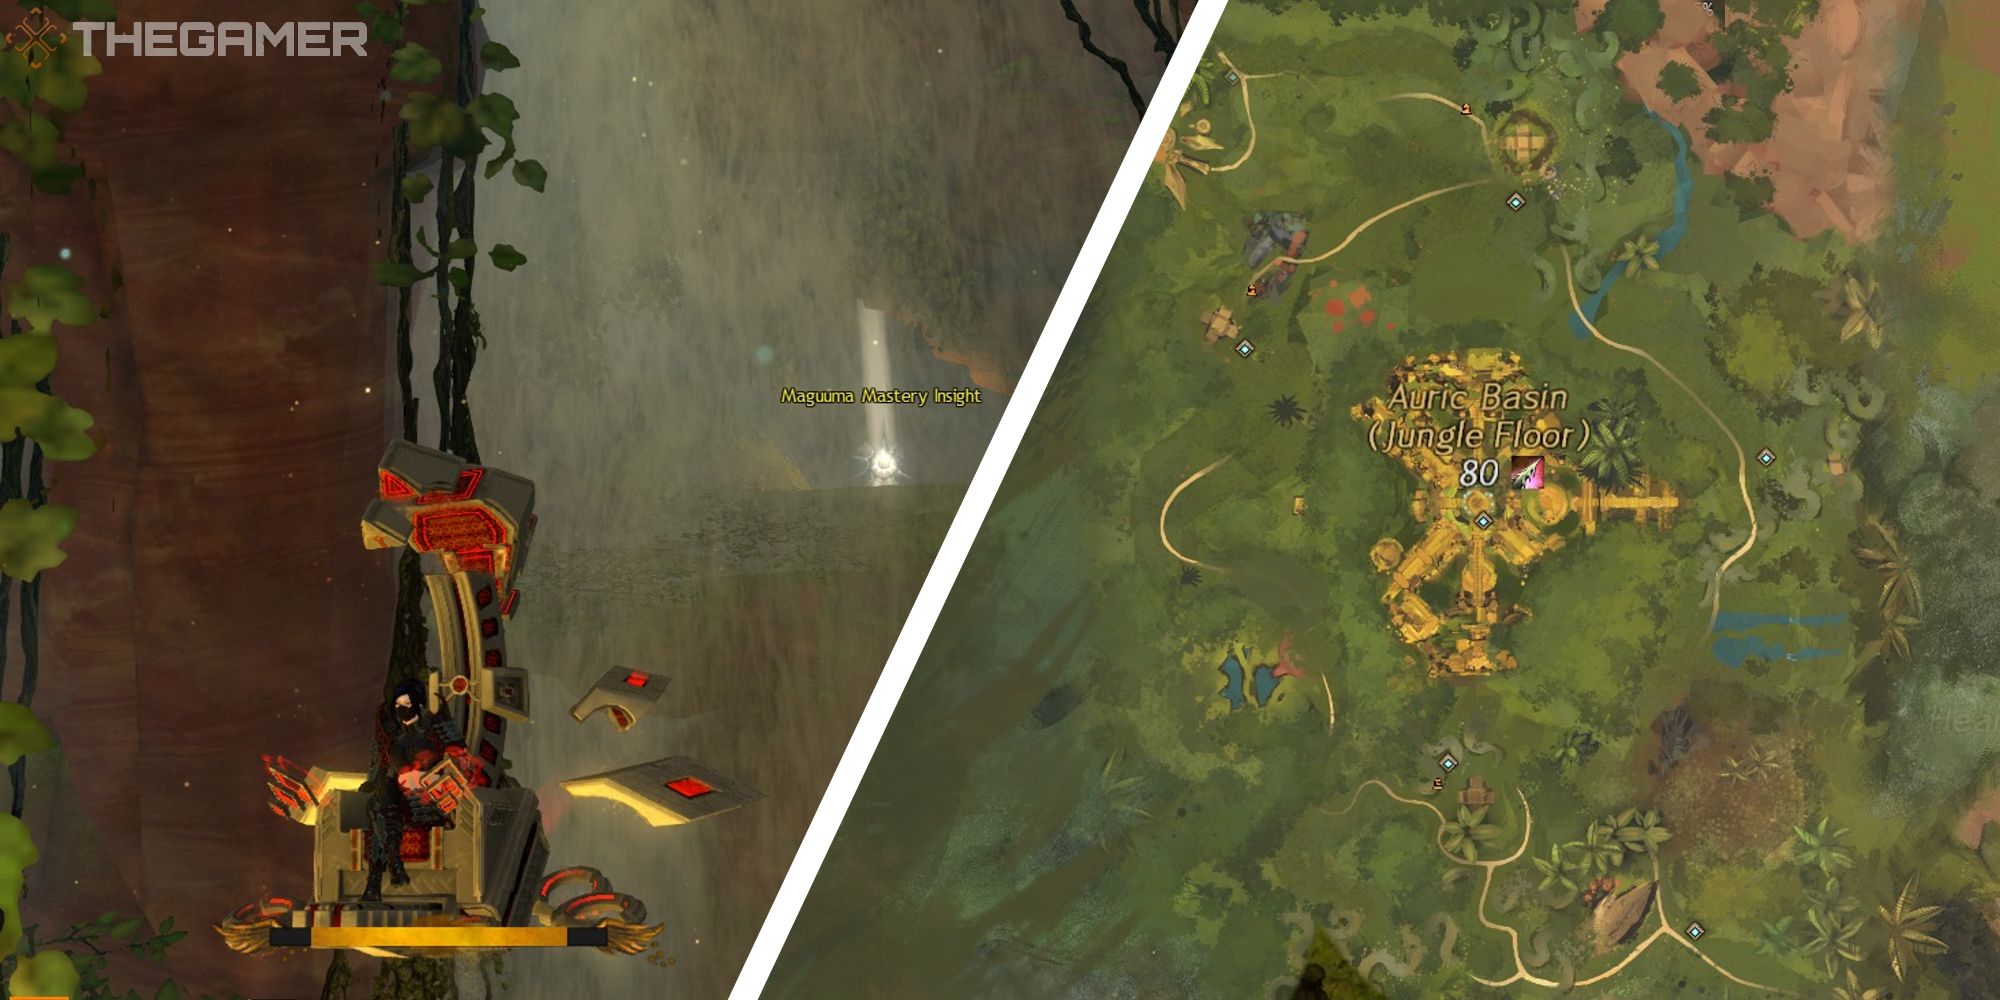 iamge of player gliding away from mastery next to image of auric basin map